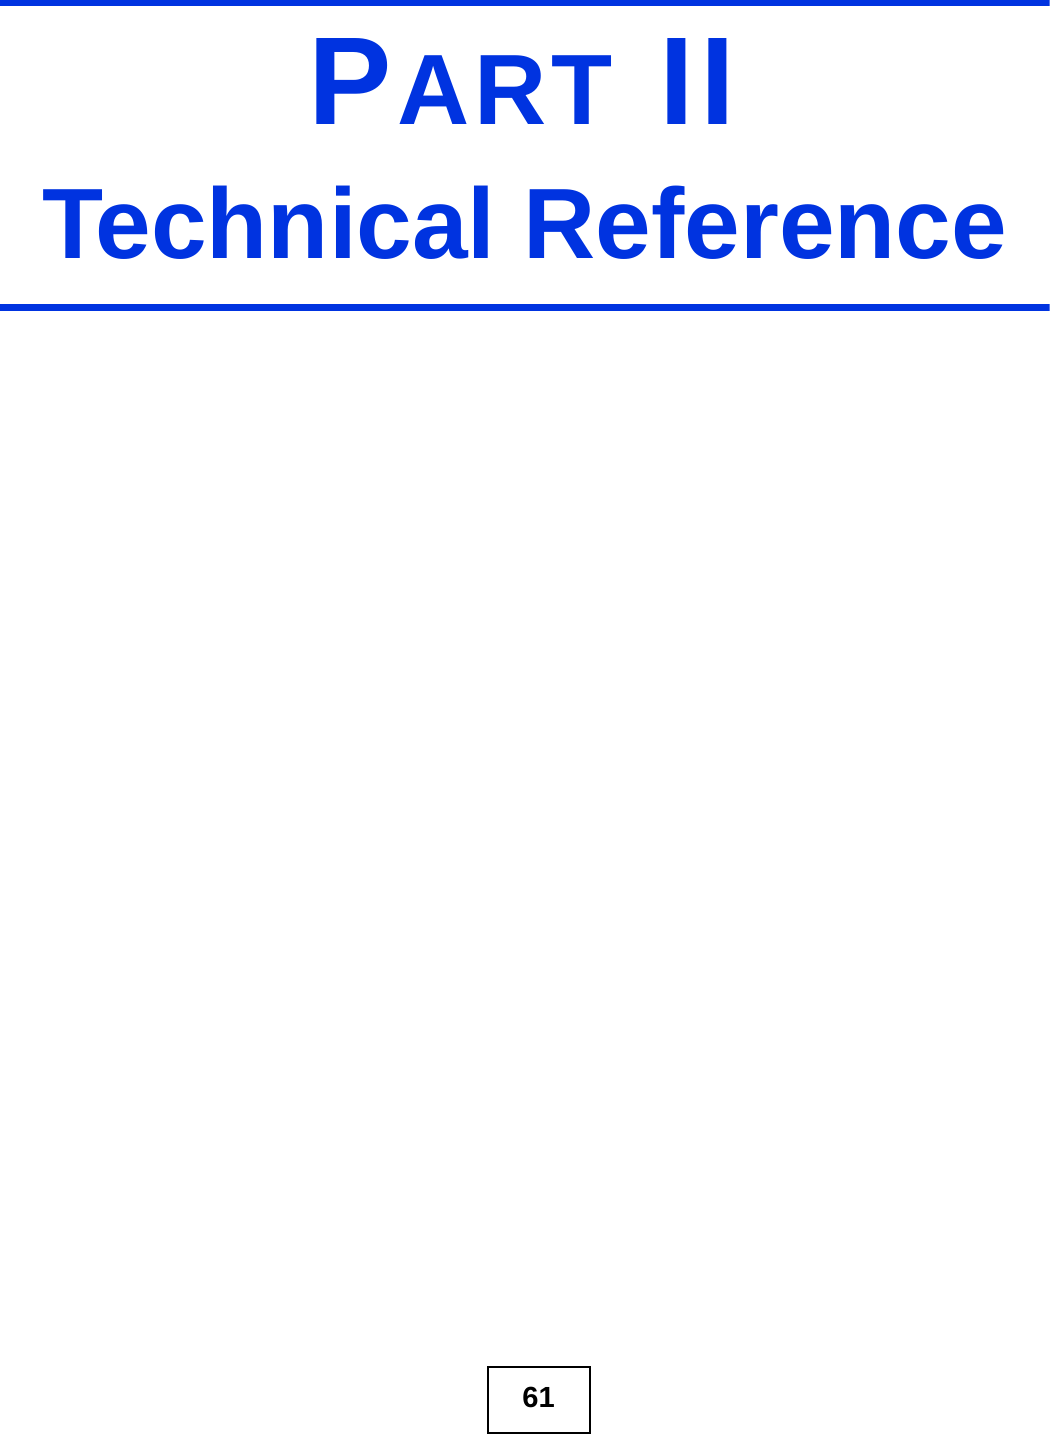 61PART IITechnical Reference